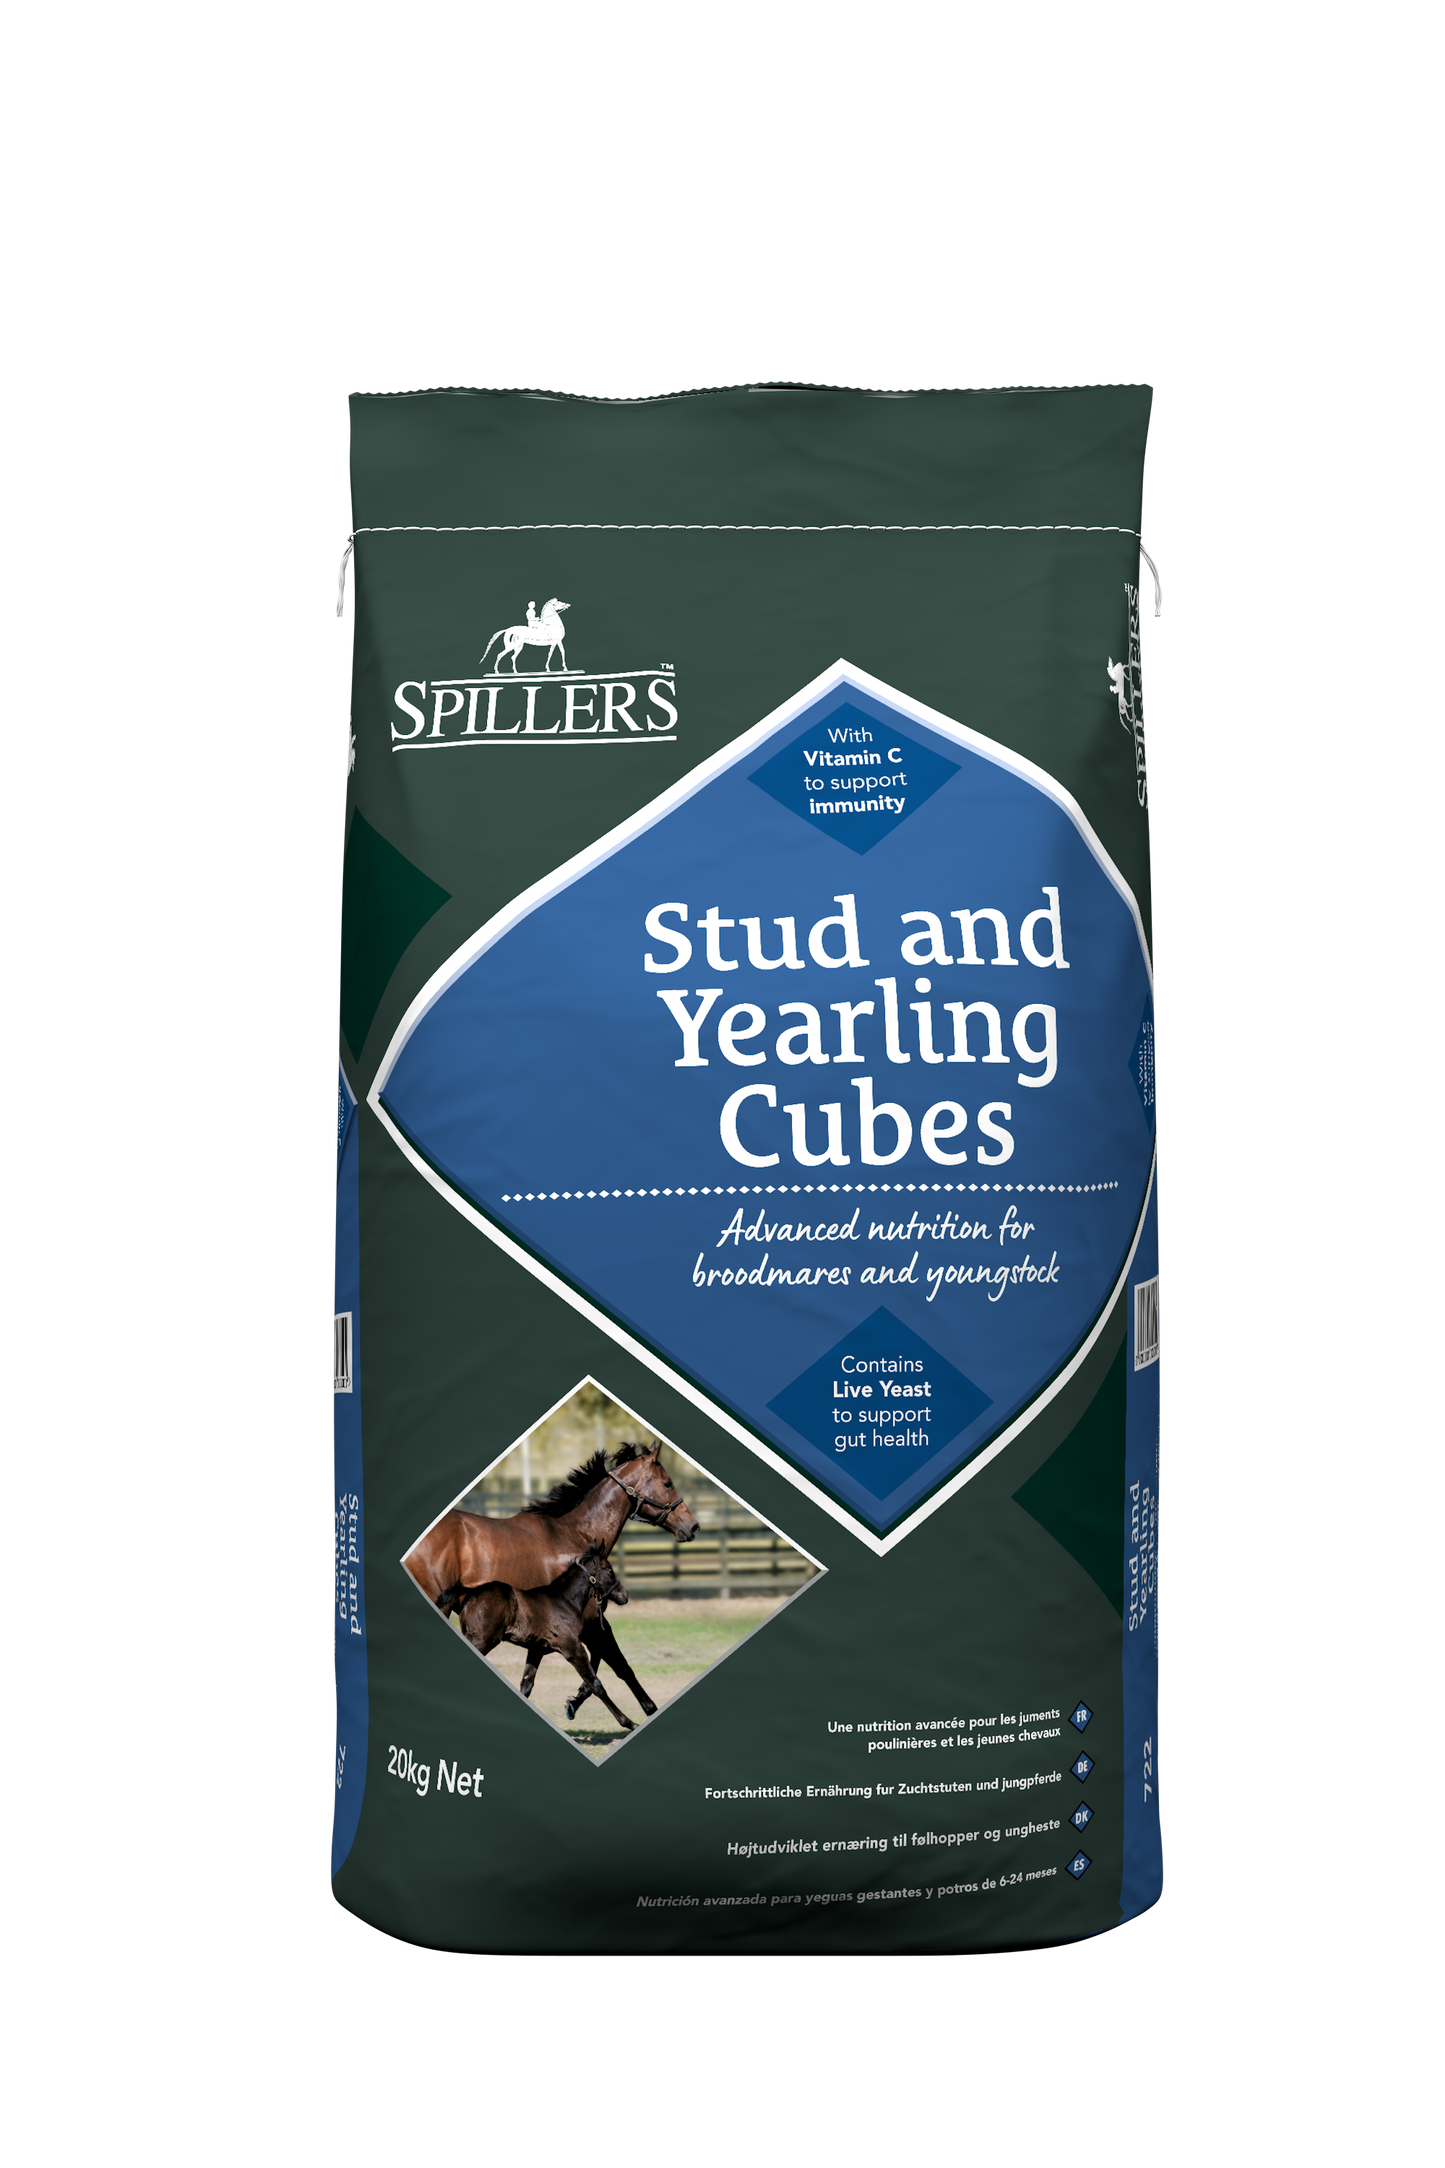 Spillers Stud & Yearling Cubes